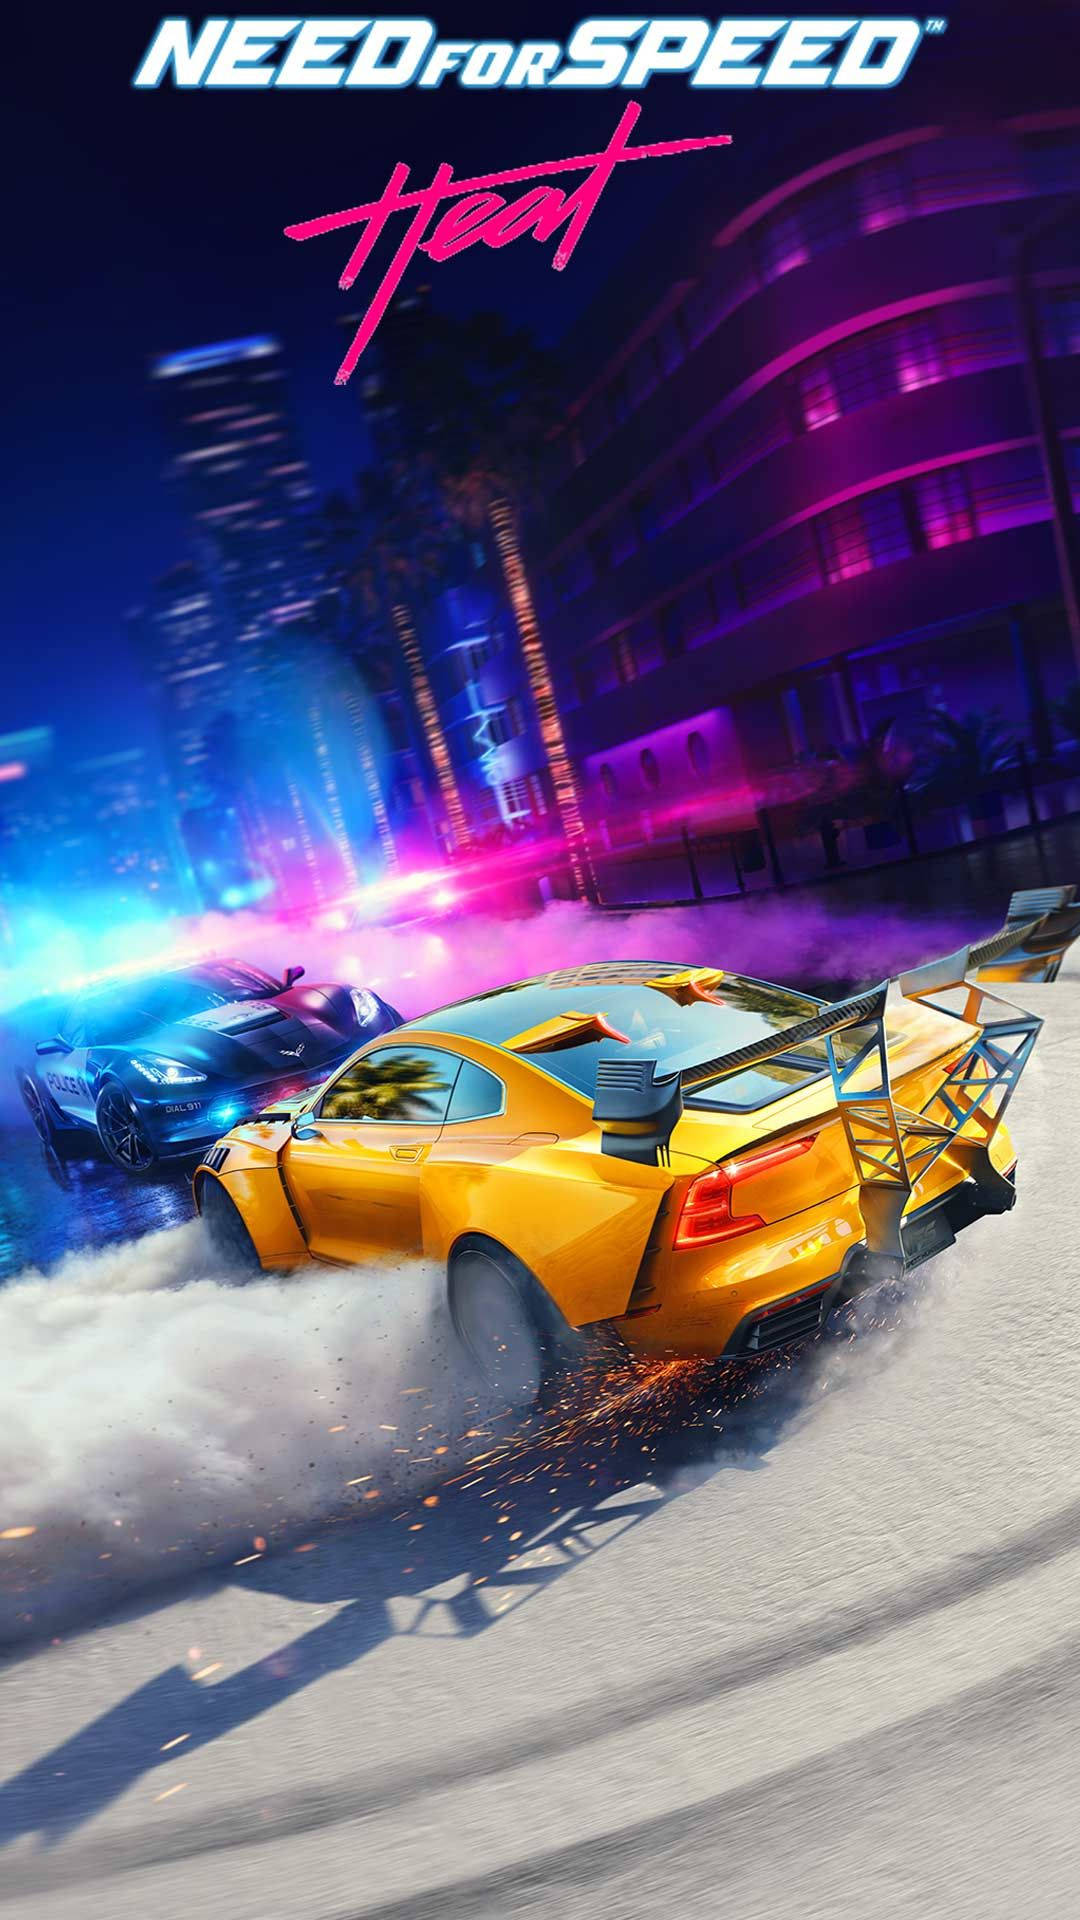 Car Crash Need For Speed Iphone Wallpaper